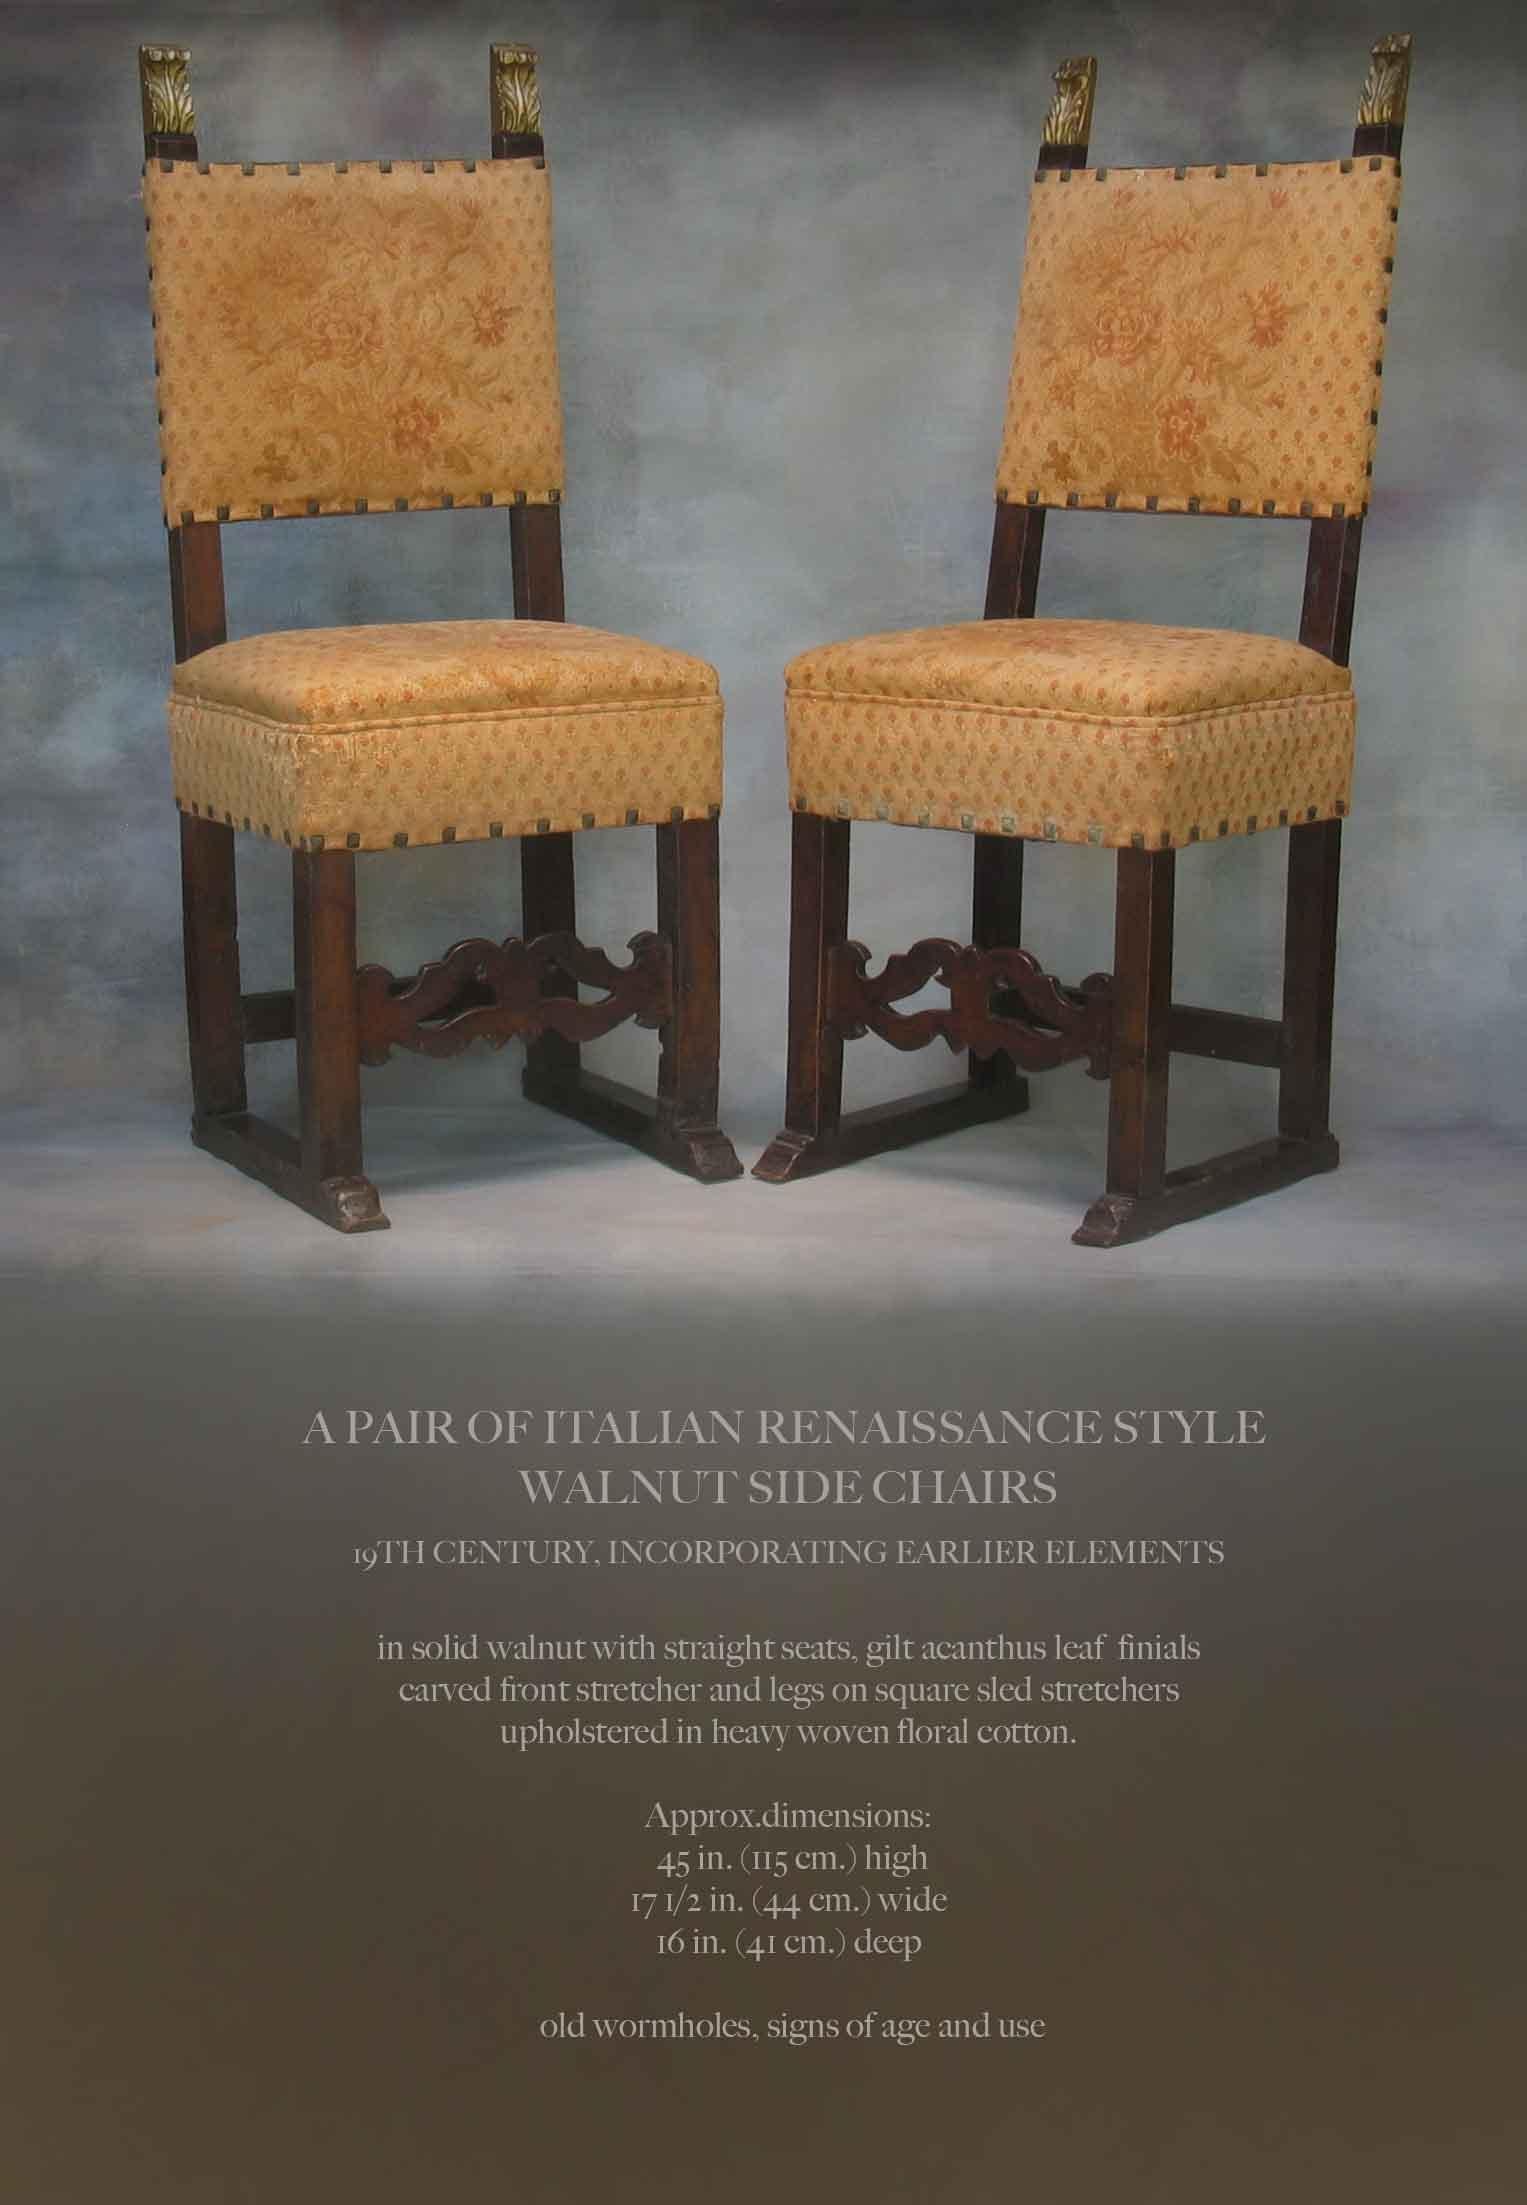 A PAIR OF ITALIAN RENAISSANCE STYLE
WALNUT SIDE CHAIRS
19TH CENTURY, INCORPORATING EARLIER ELEMENTS

In solid walnut with straight seats, gilt acanthus leaf  finials, carved front stretcher and legs on square sled stretchers.
Upholstered in heavy